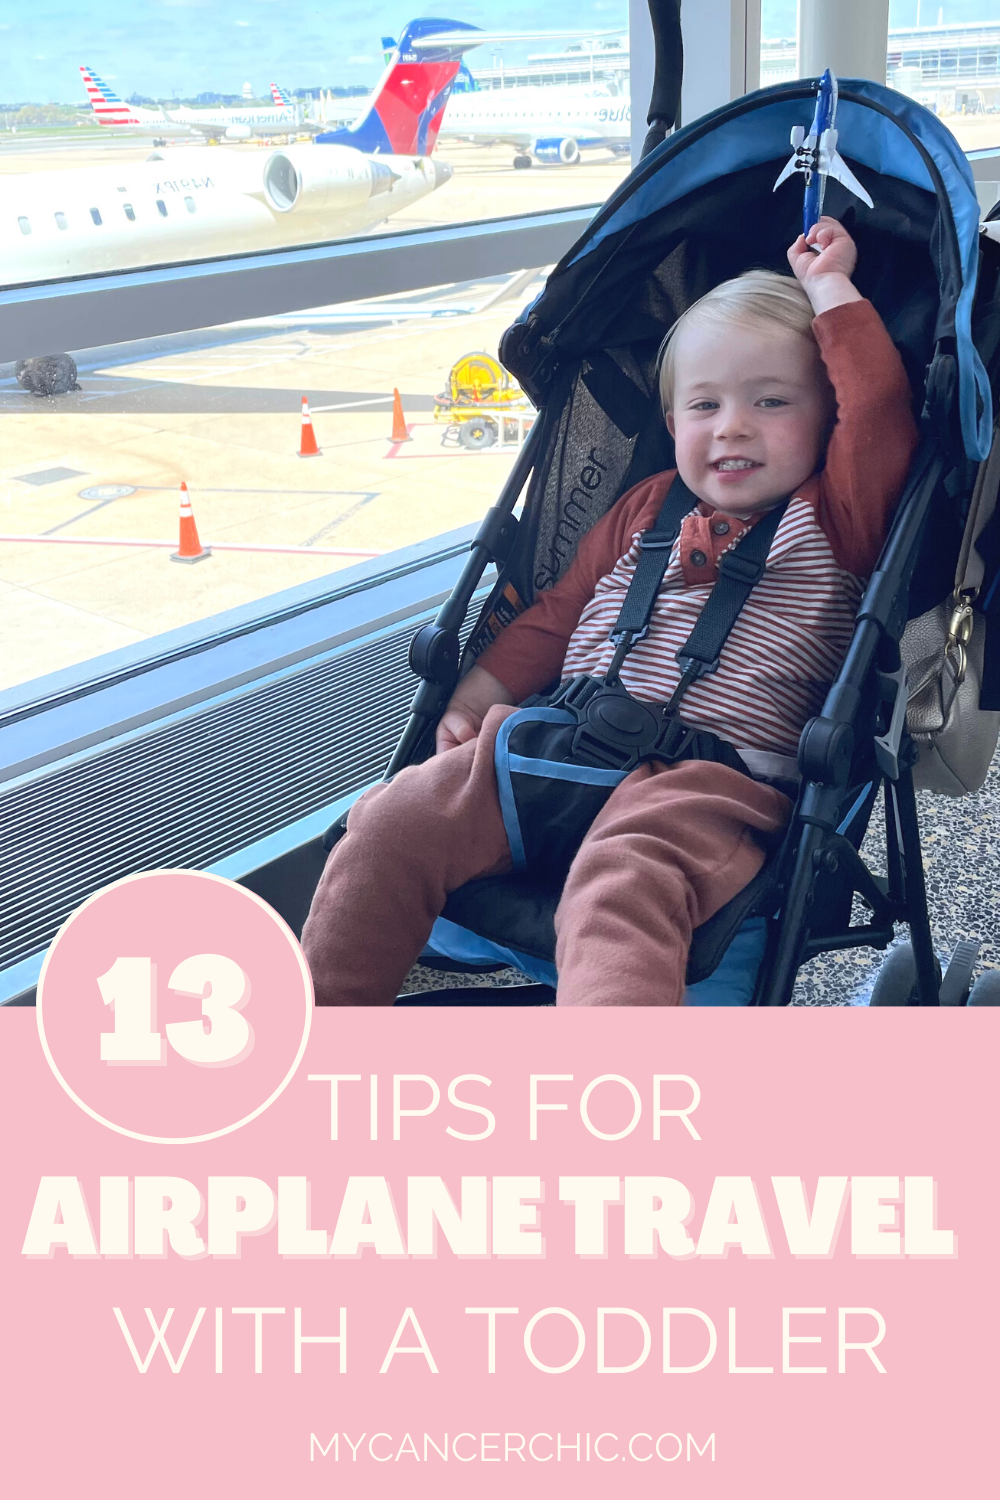 toddler in a stroller at the airport - traveling with a toddler on a plane tips